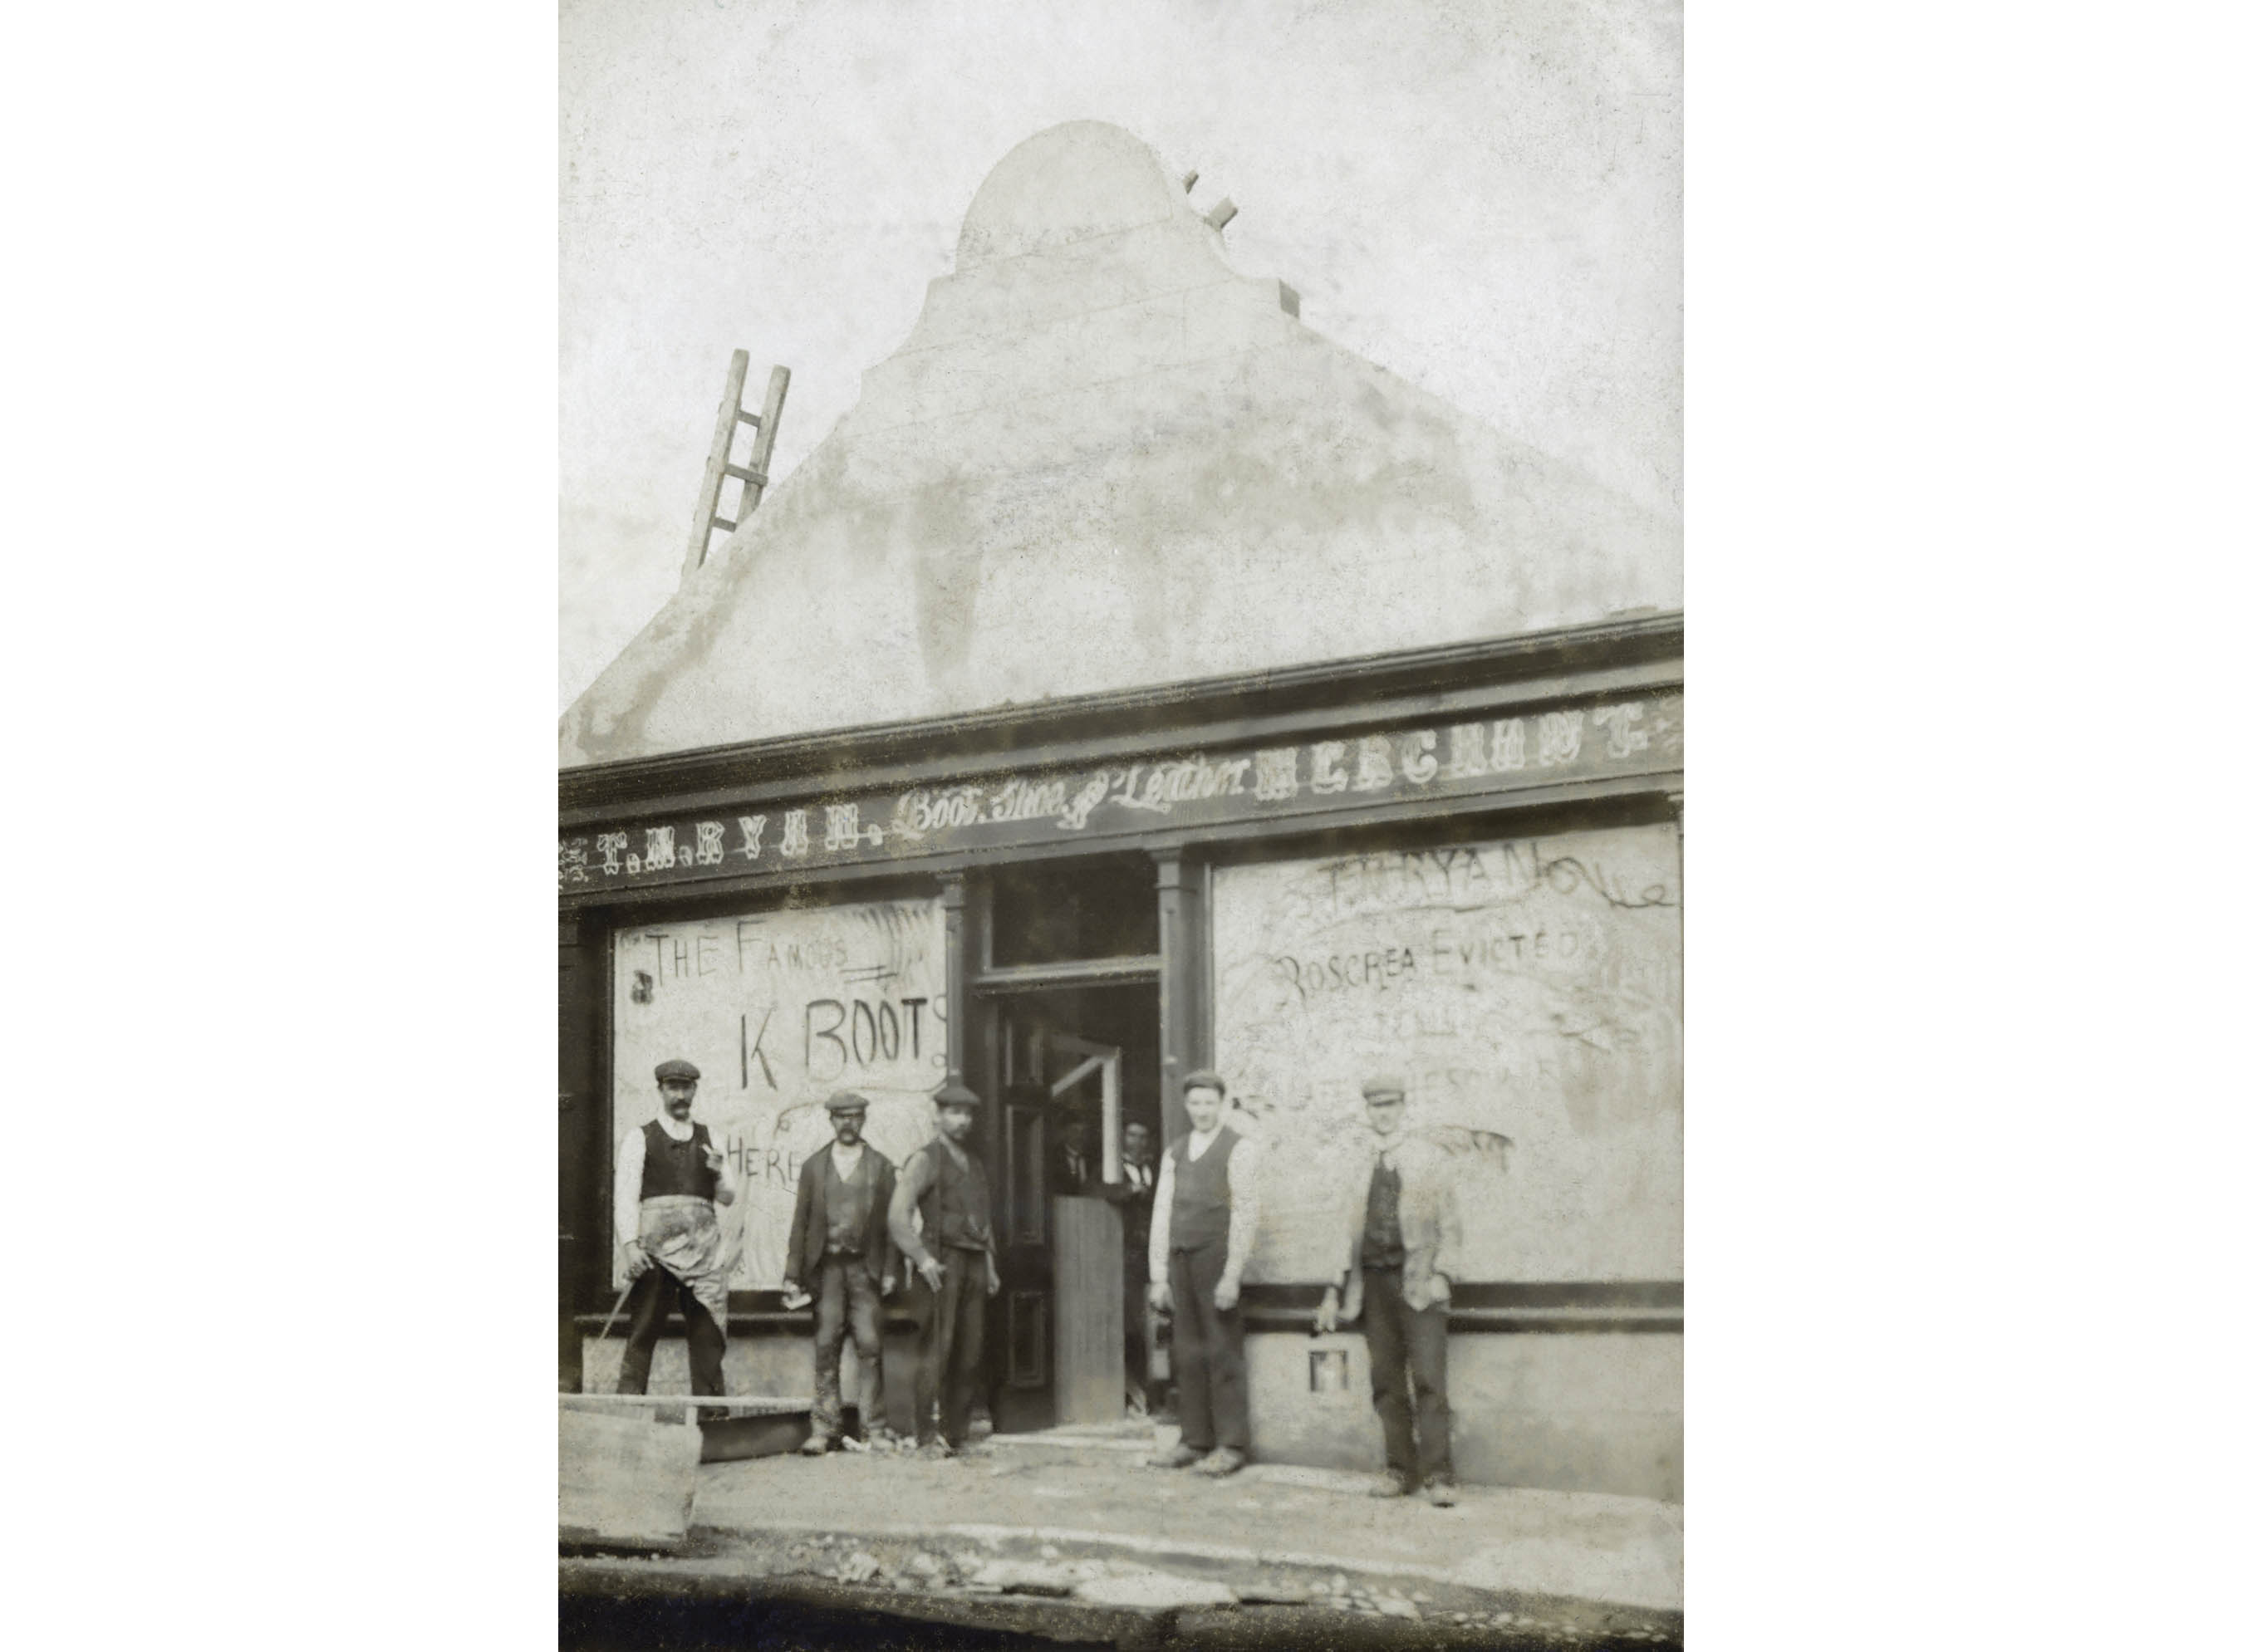 Men stand in front of a shoe and leather merchant store with boarded up windows. Writing on the right window reads “T.M.Ryan Roscrea Evicted.” Roscrea, Co. Tipperary, c. 1888.